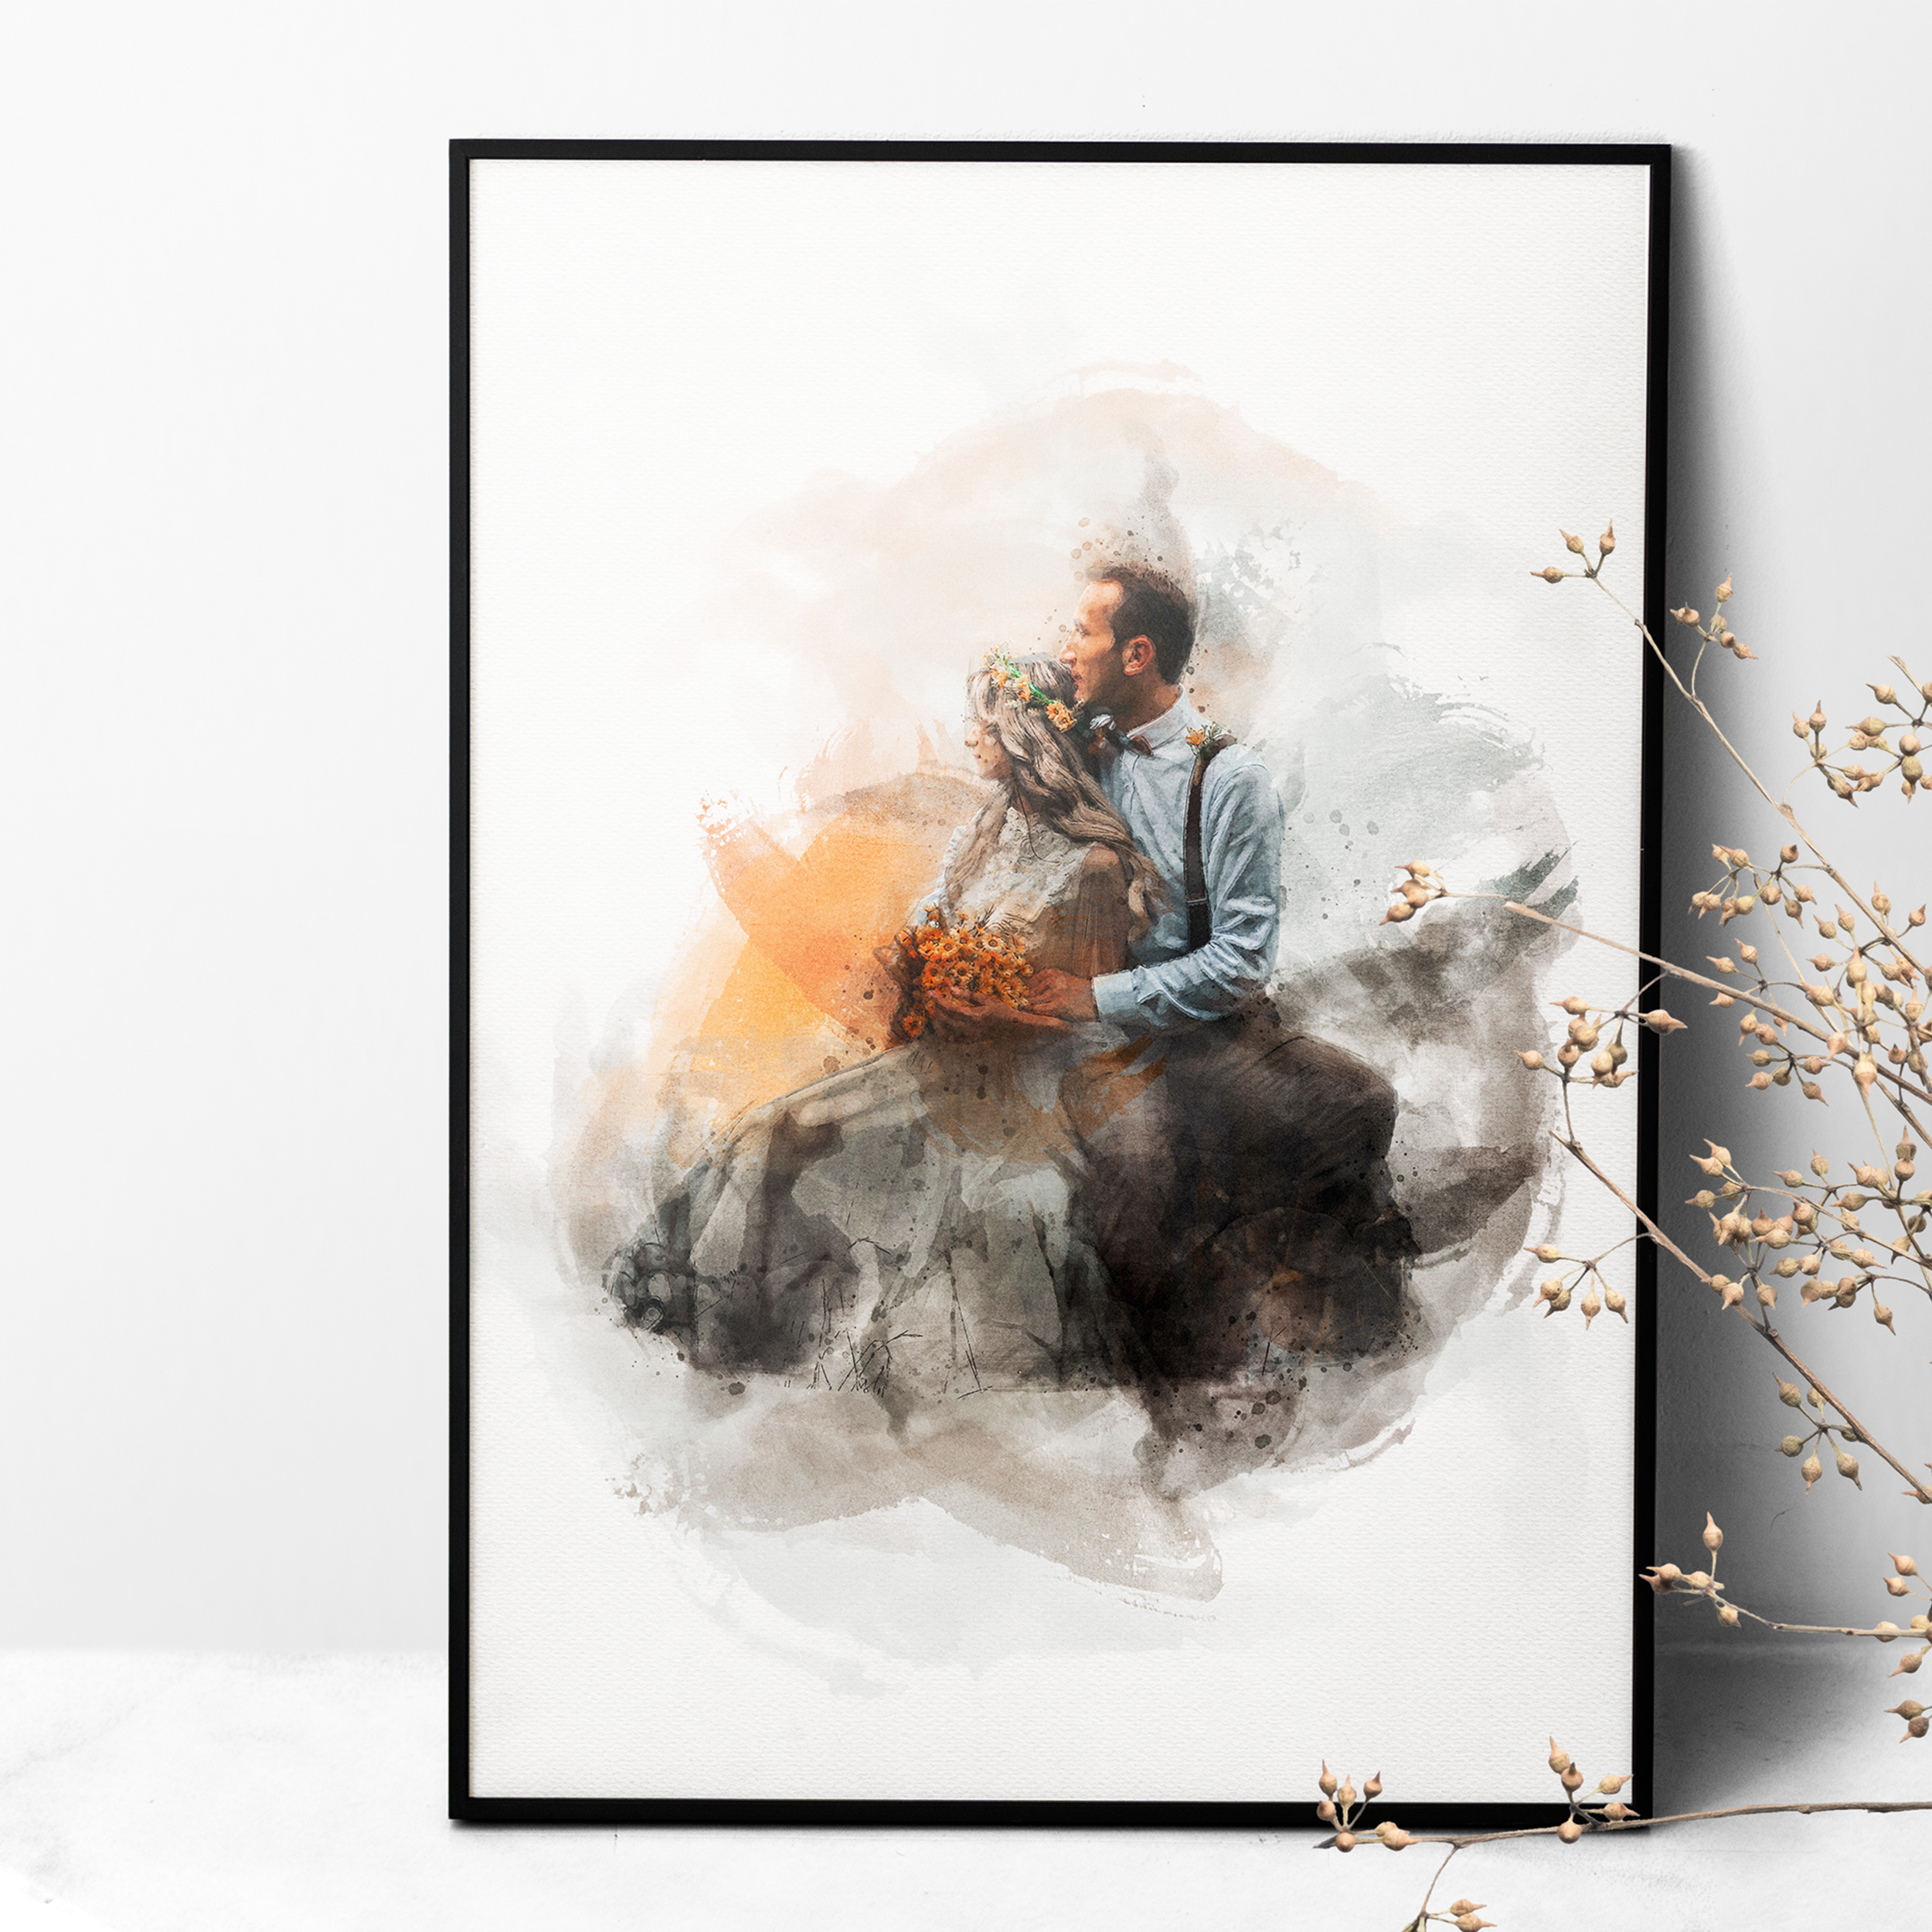 Personalized Watercolor Portrait from Photo - Ideal Wedding, Anniversary, or Engagement Gift, Stunning Painting From Photo Art for Wall Decor